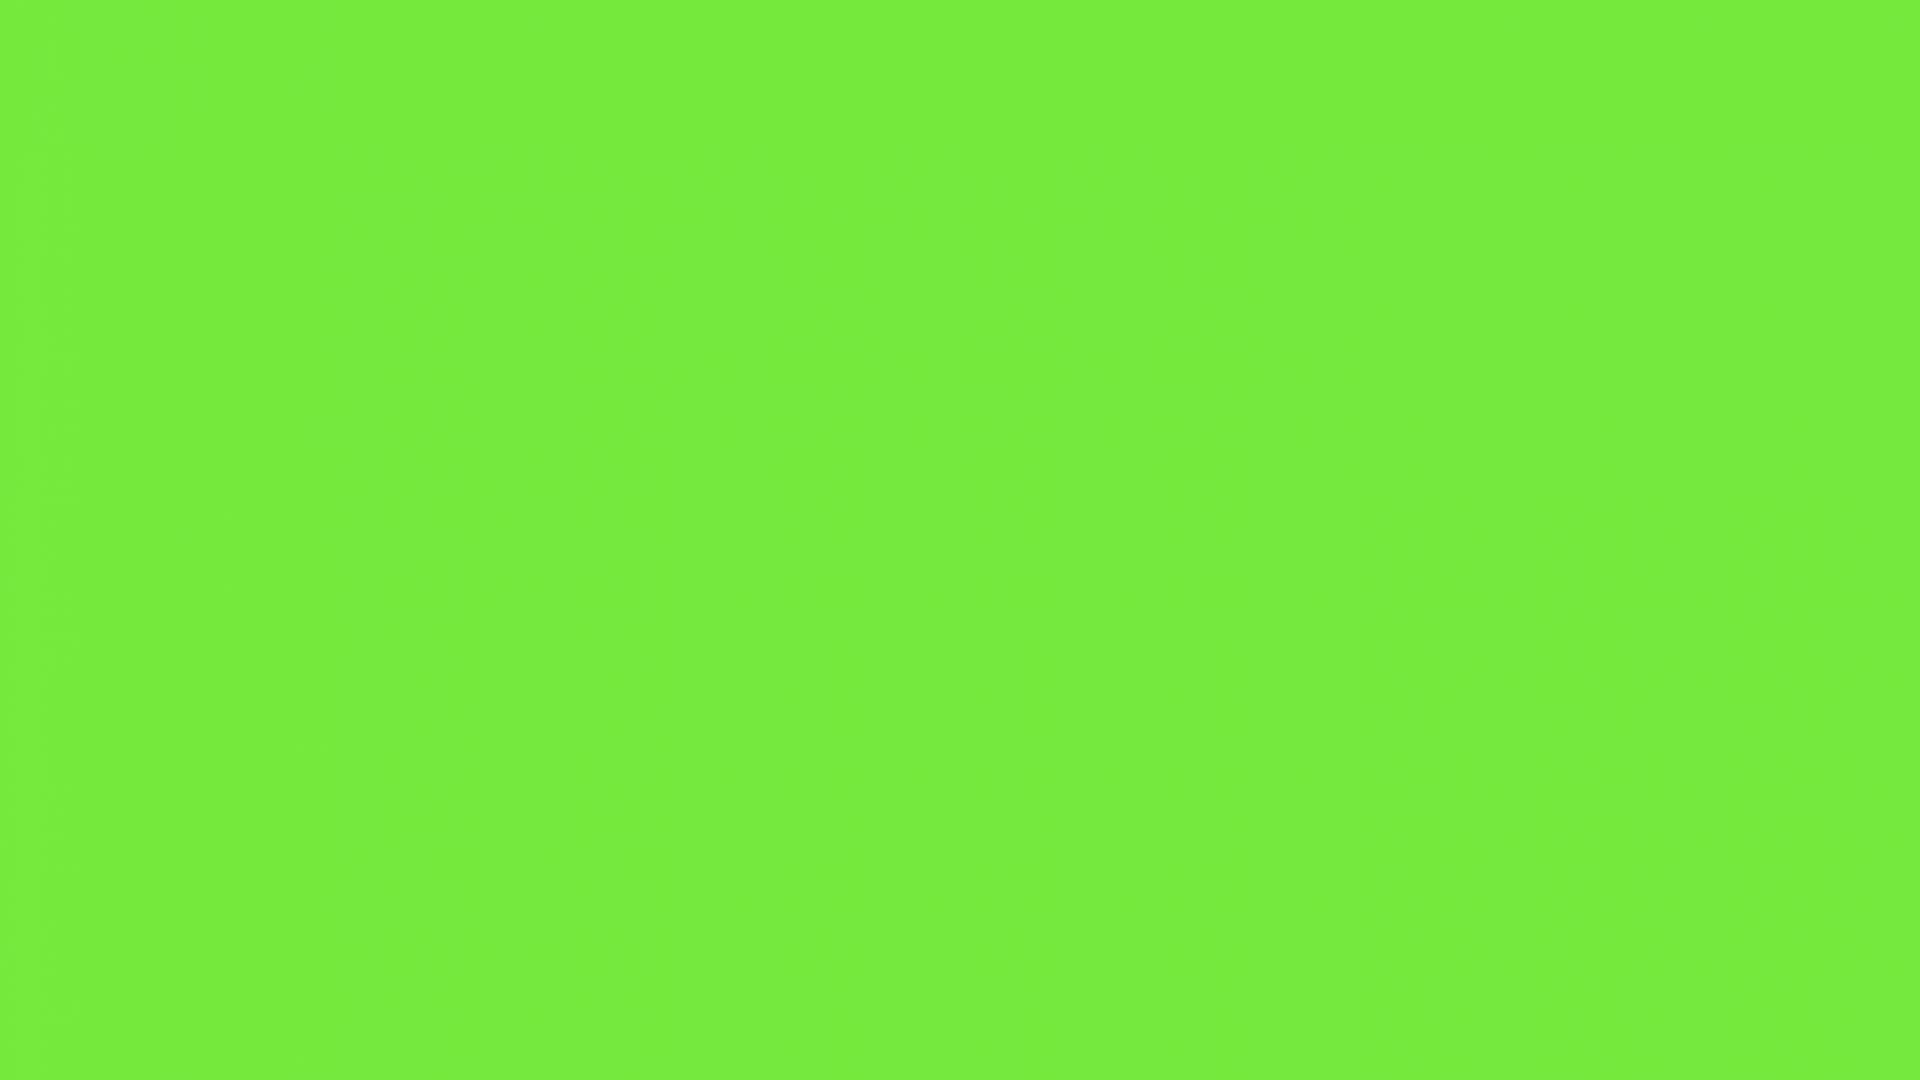 Lime green background picture by designed2shop photobucket   27202